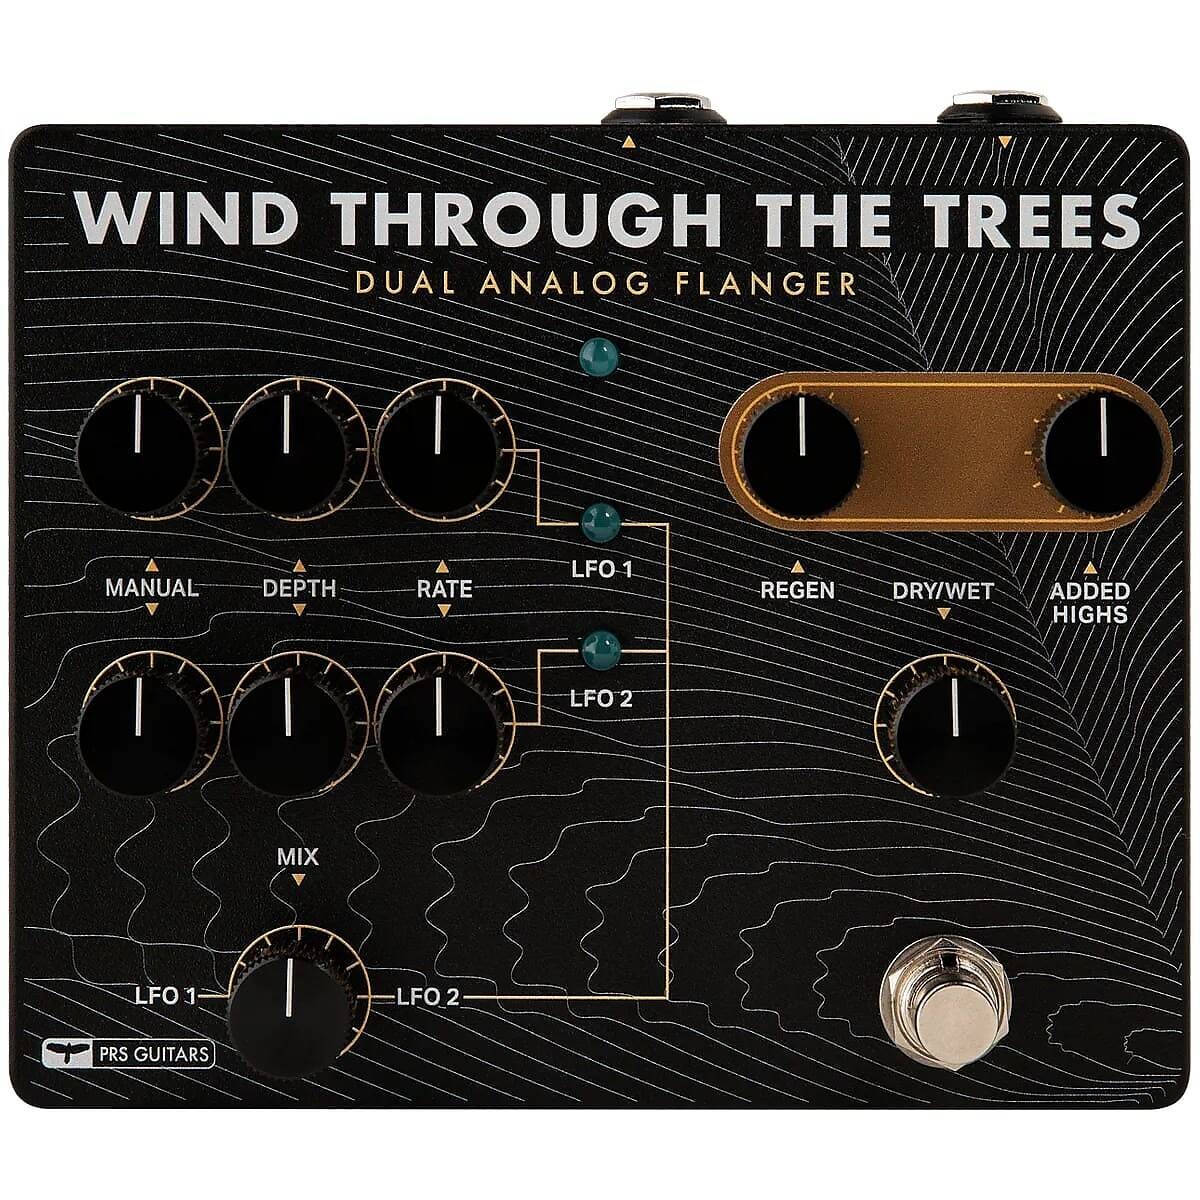 2022 PRS - Wind Through The Trees Dual Analog Flanger Pedal